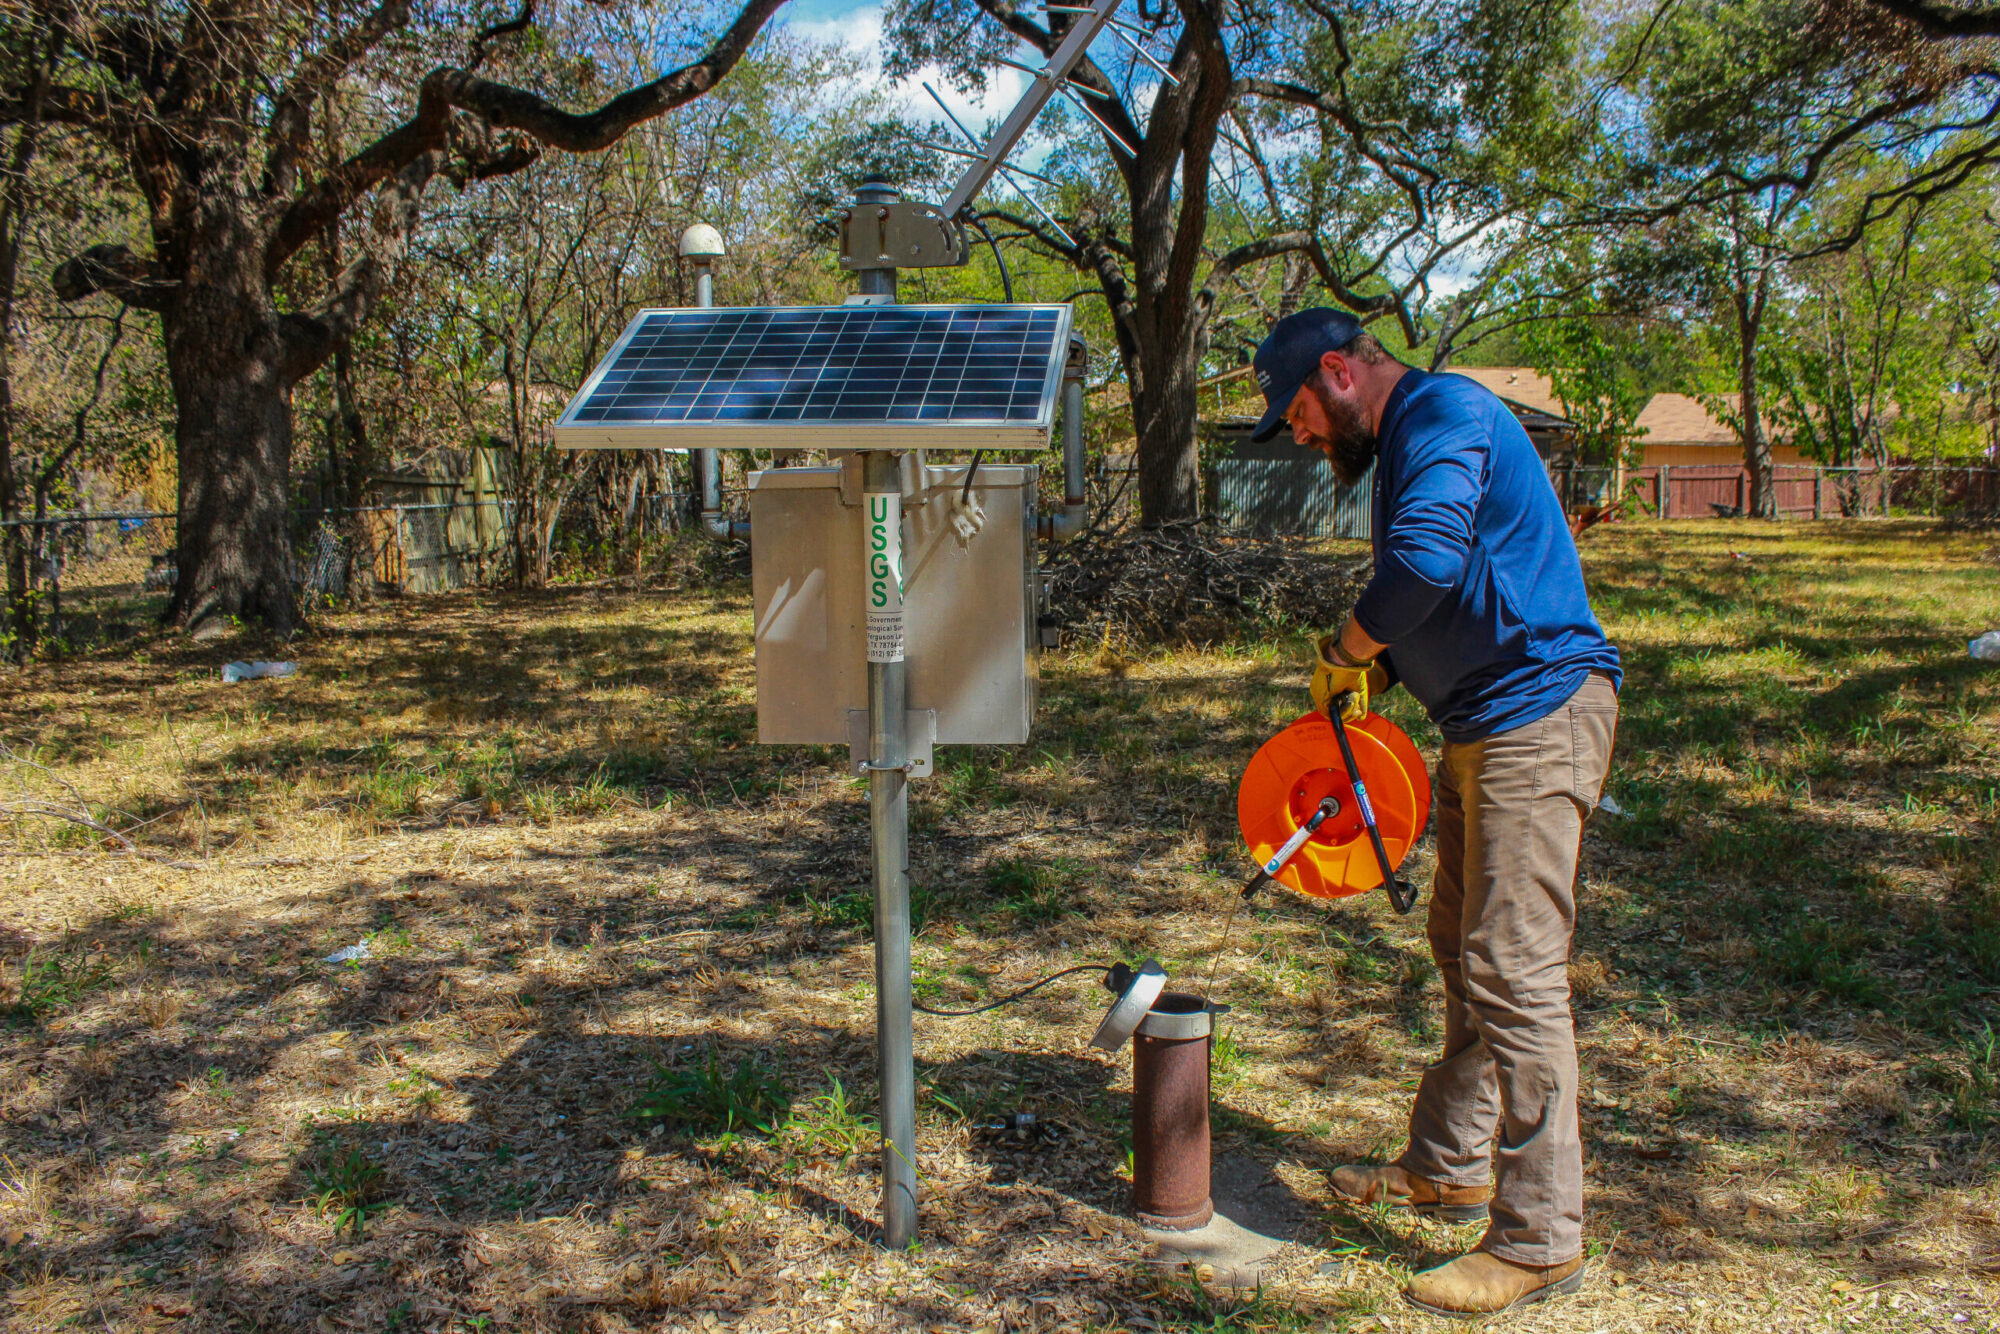 District staff measure the Lovelady monitor well. On the right the staff member holds an orange measuring tape. On the left is the well along with the gauge that records measurements daily.